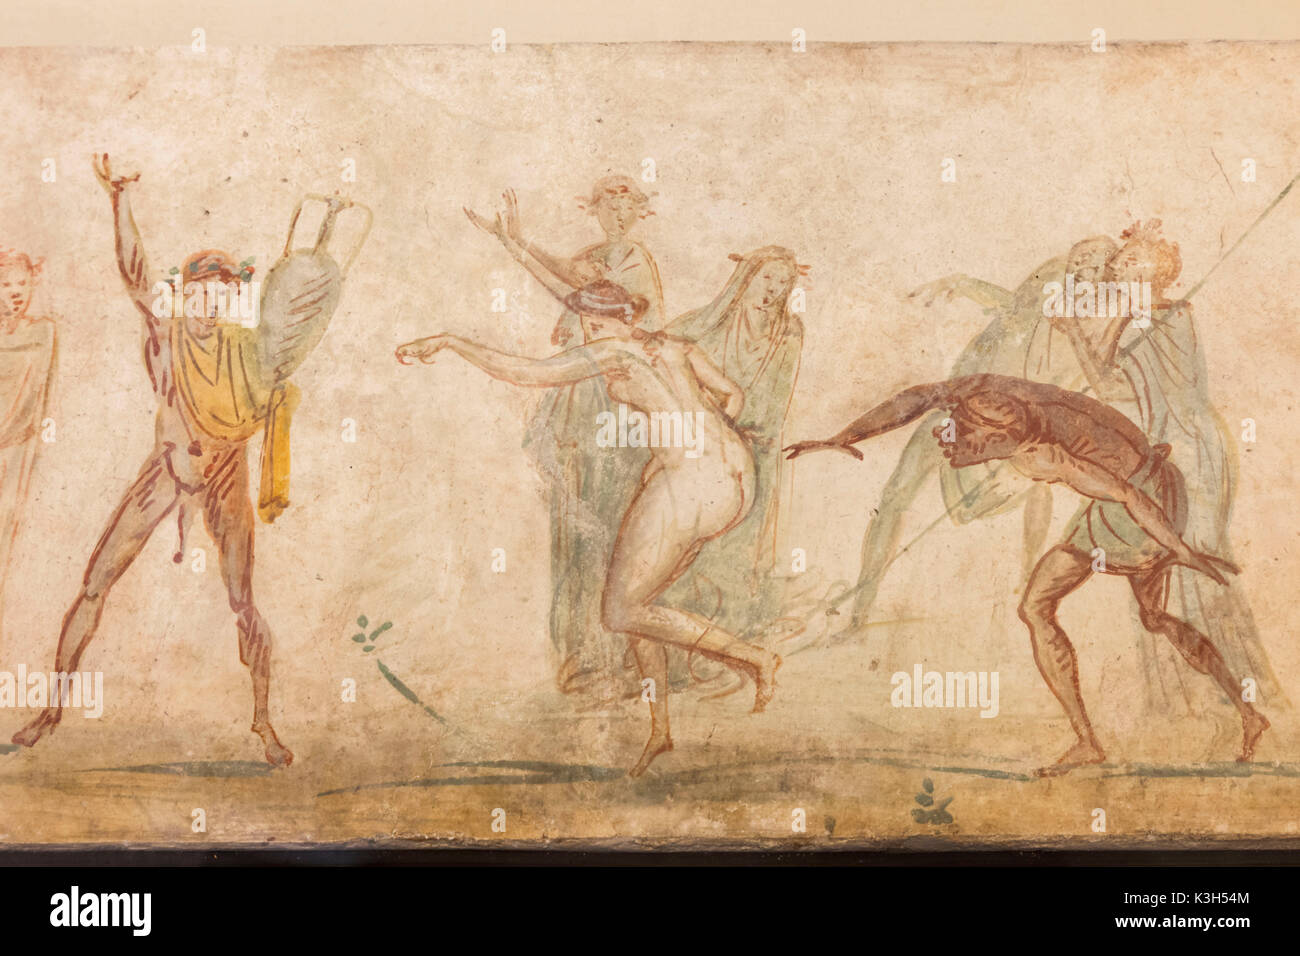 England, London, British Museum, Roman Empire Room, Roman Wall Painting depicting Followers of Bacchus from a Tomb in the Villa Pamphilj, Rome dated 50 BC Stock Photo